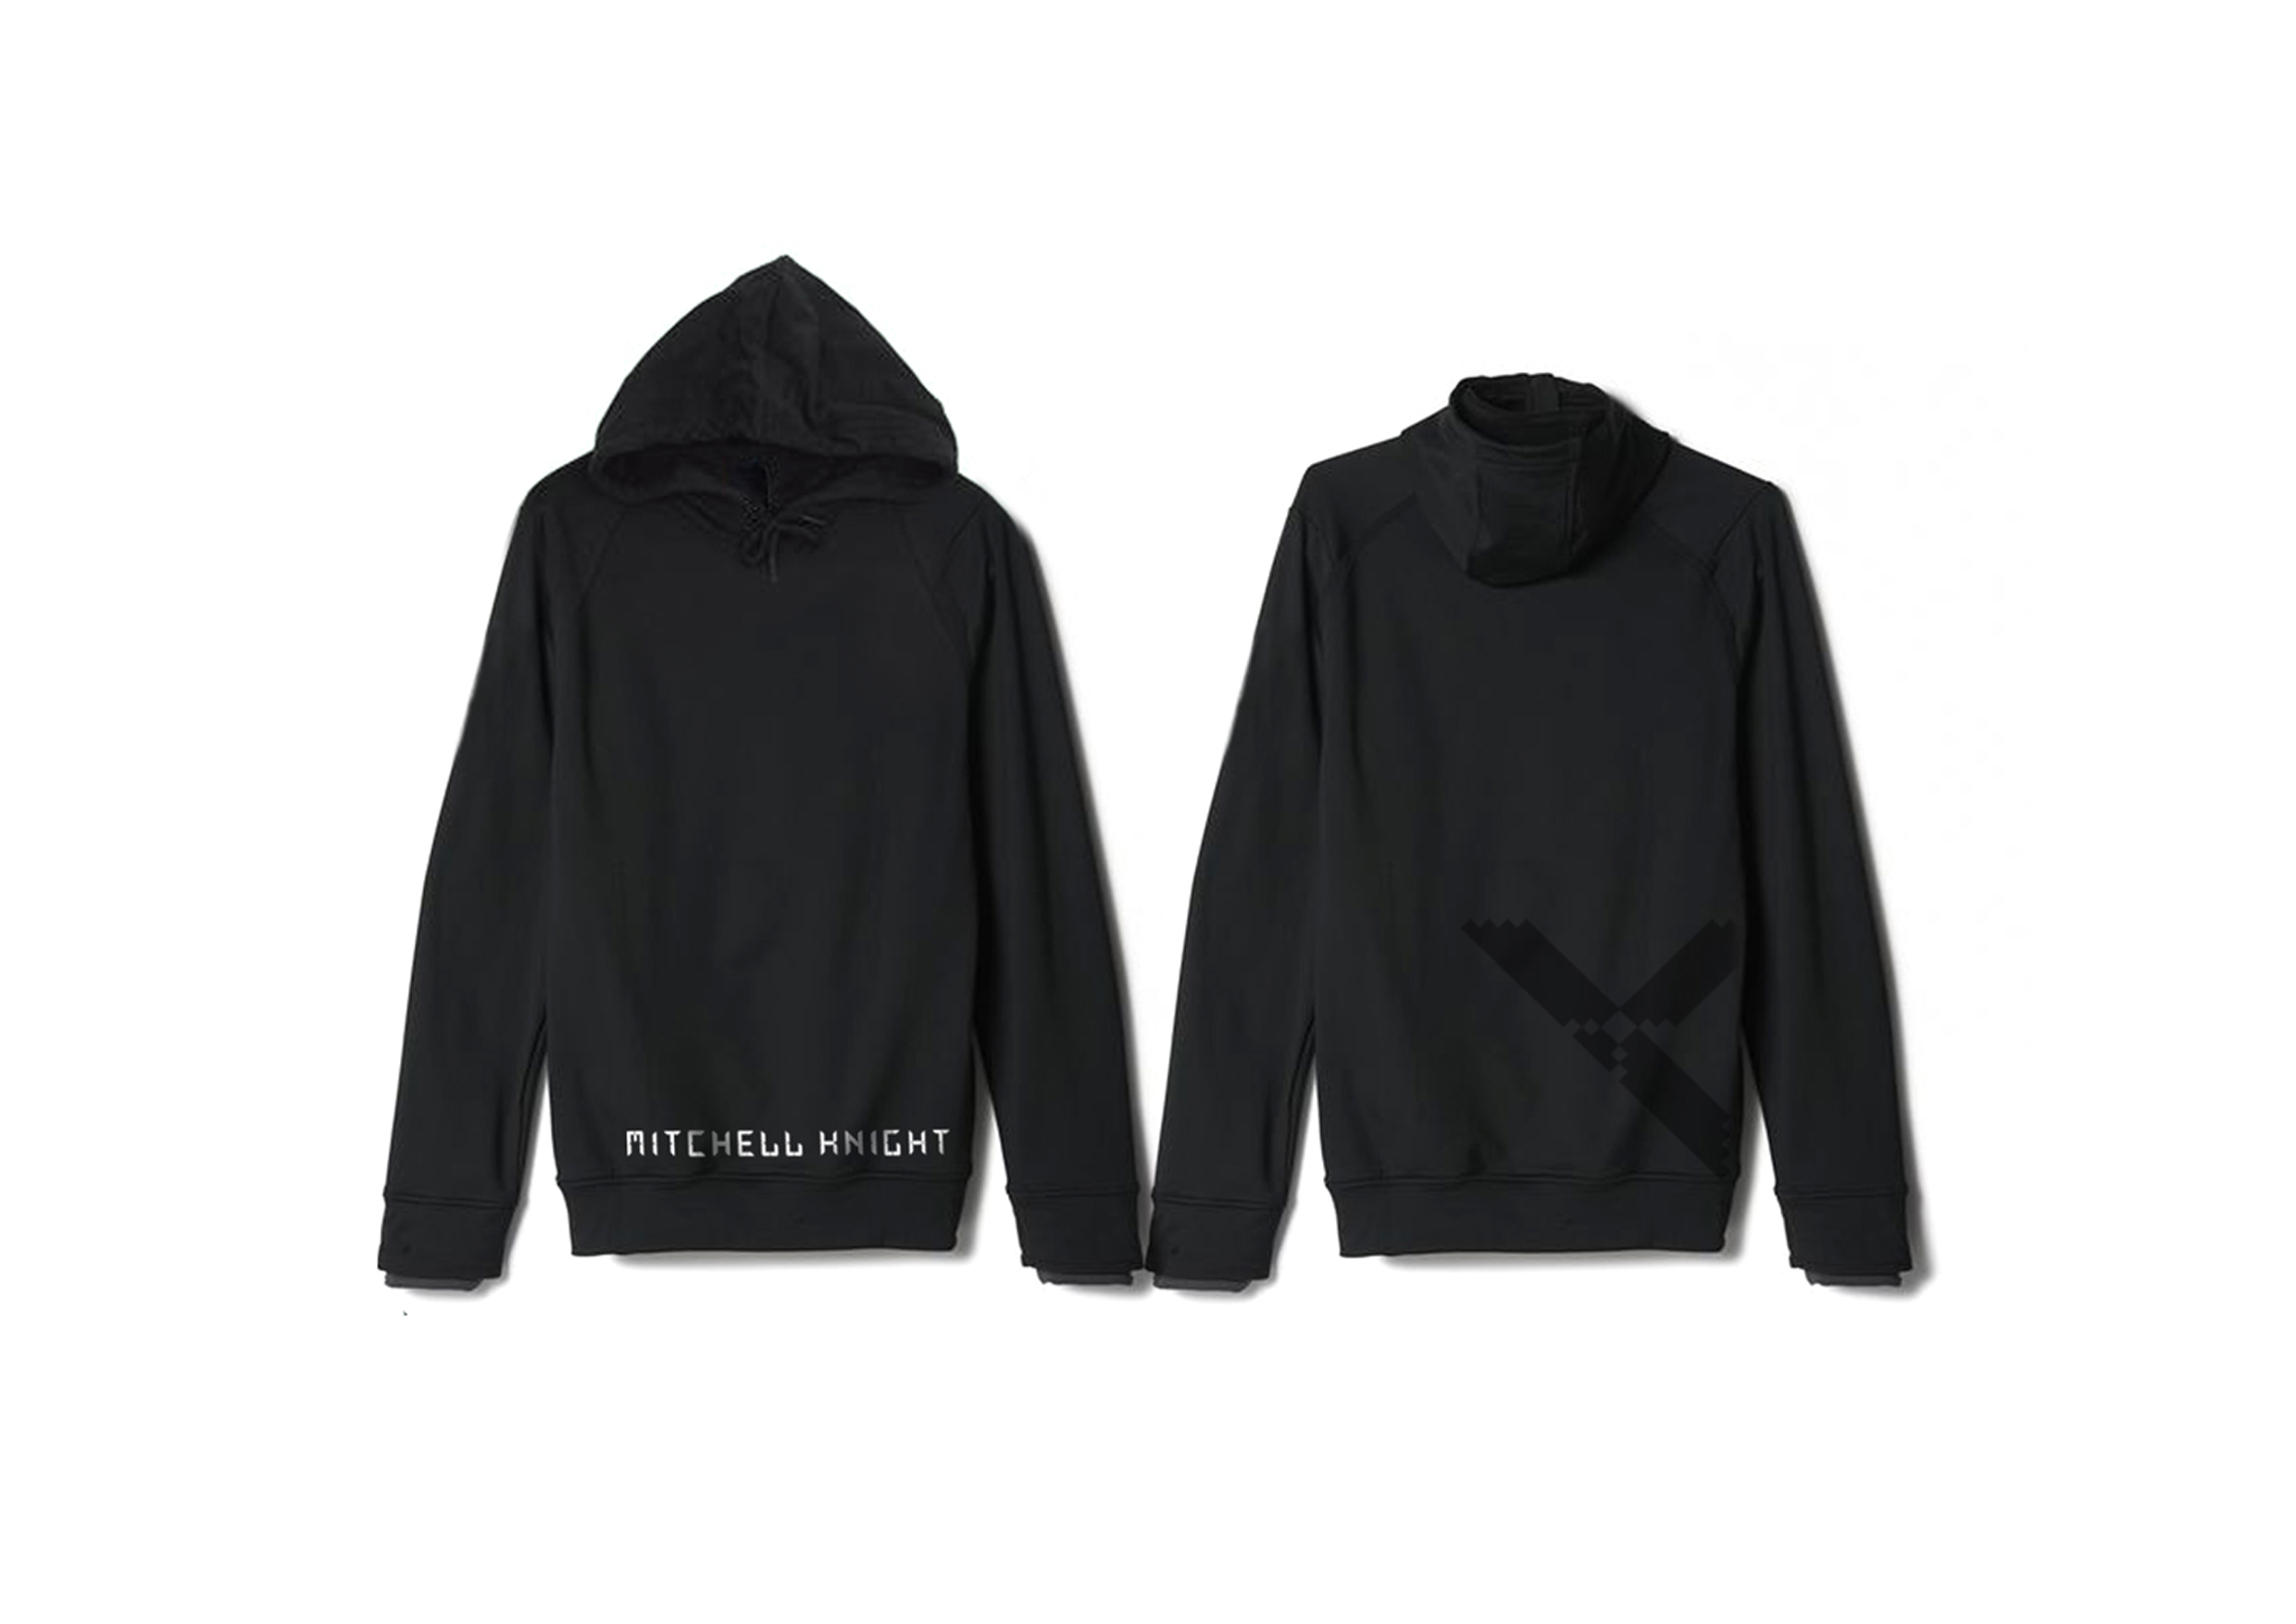 Mitchell Knight, Sportswear, clothing range, Tag, clothing, Adelaide, Design, graphic design, creative, hoodie, sweater